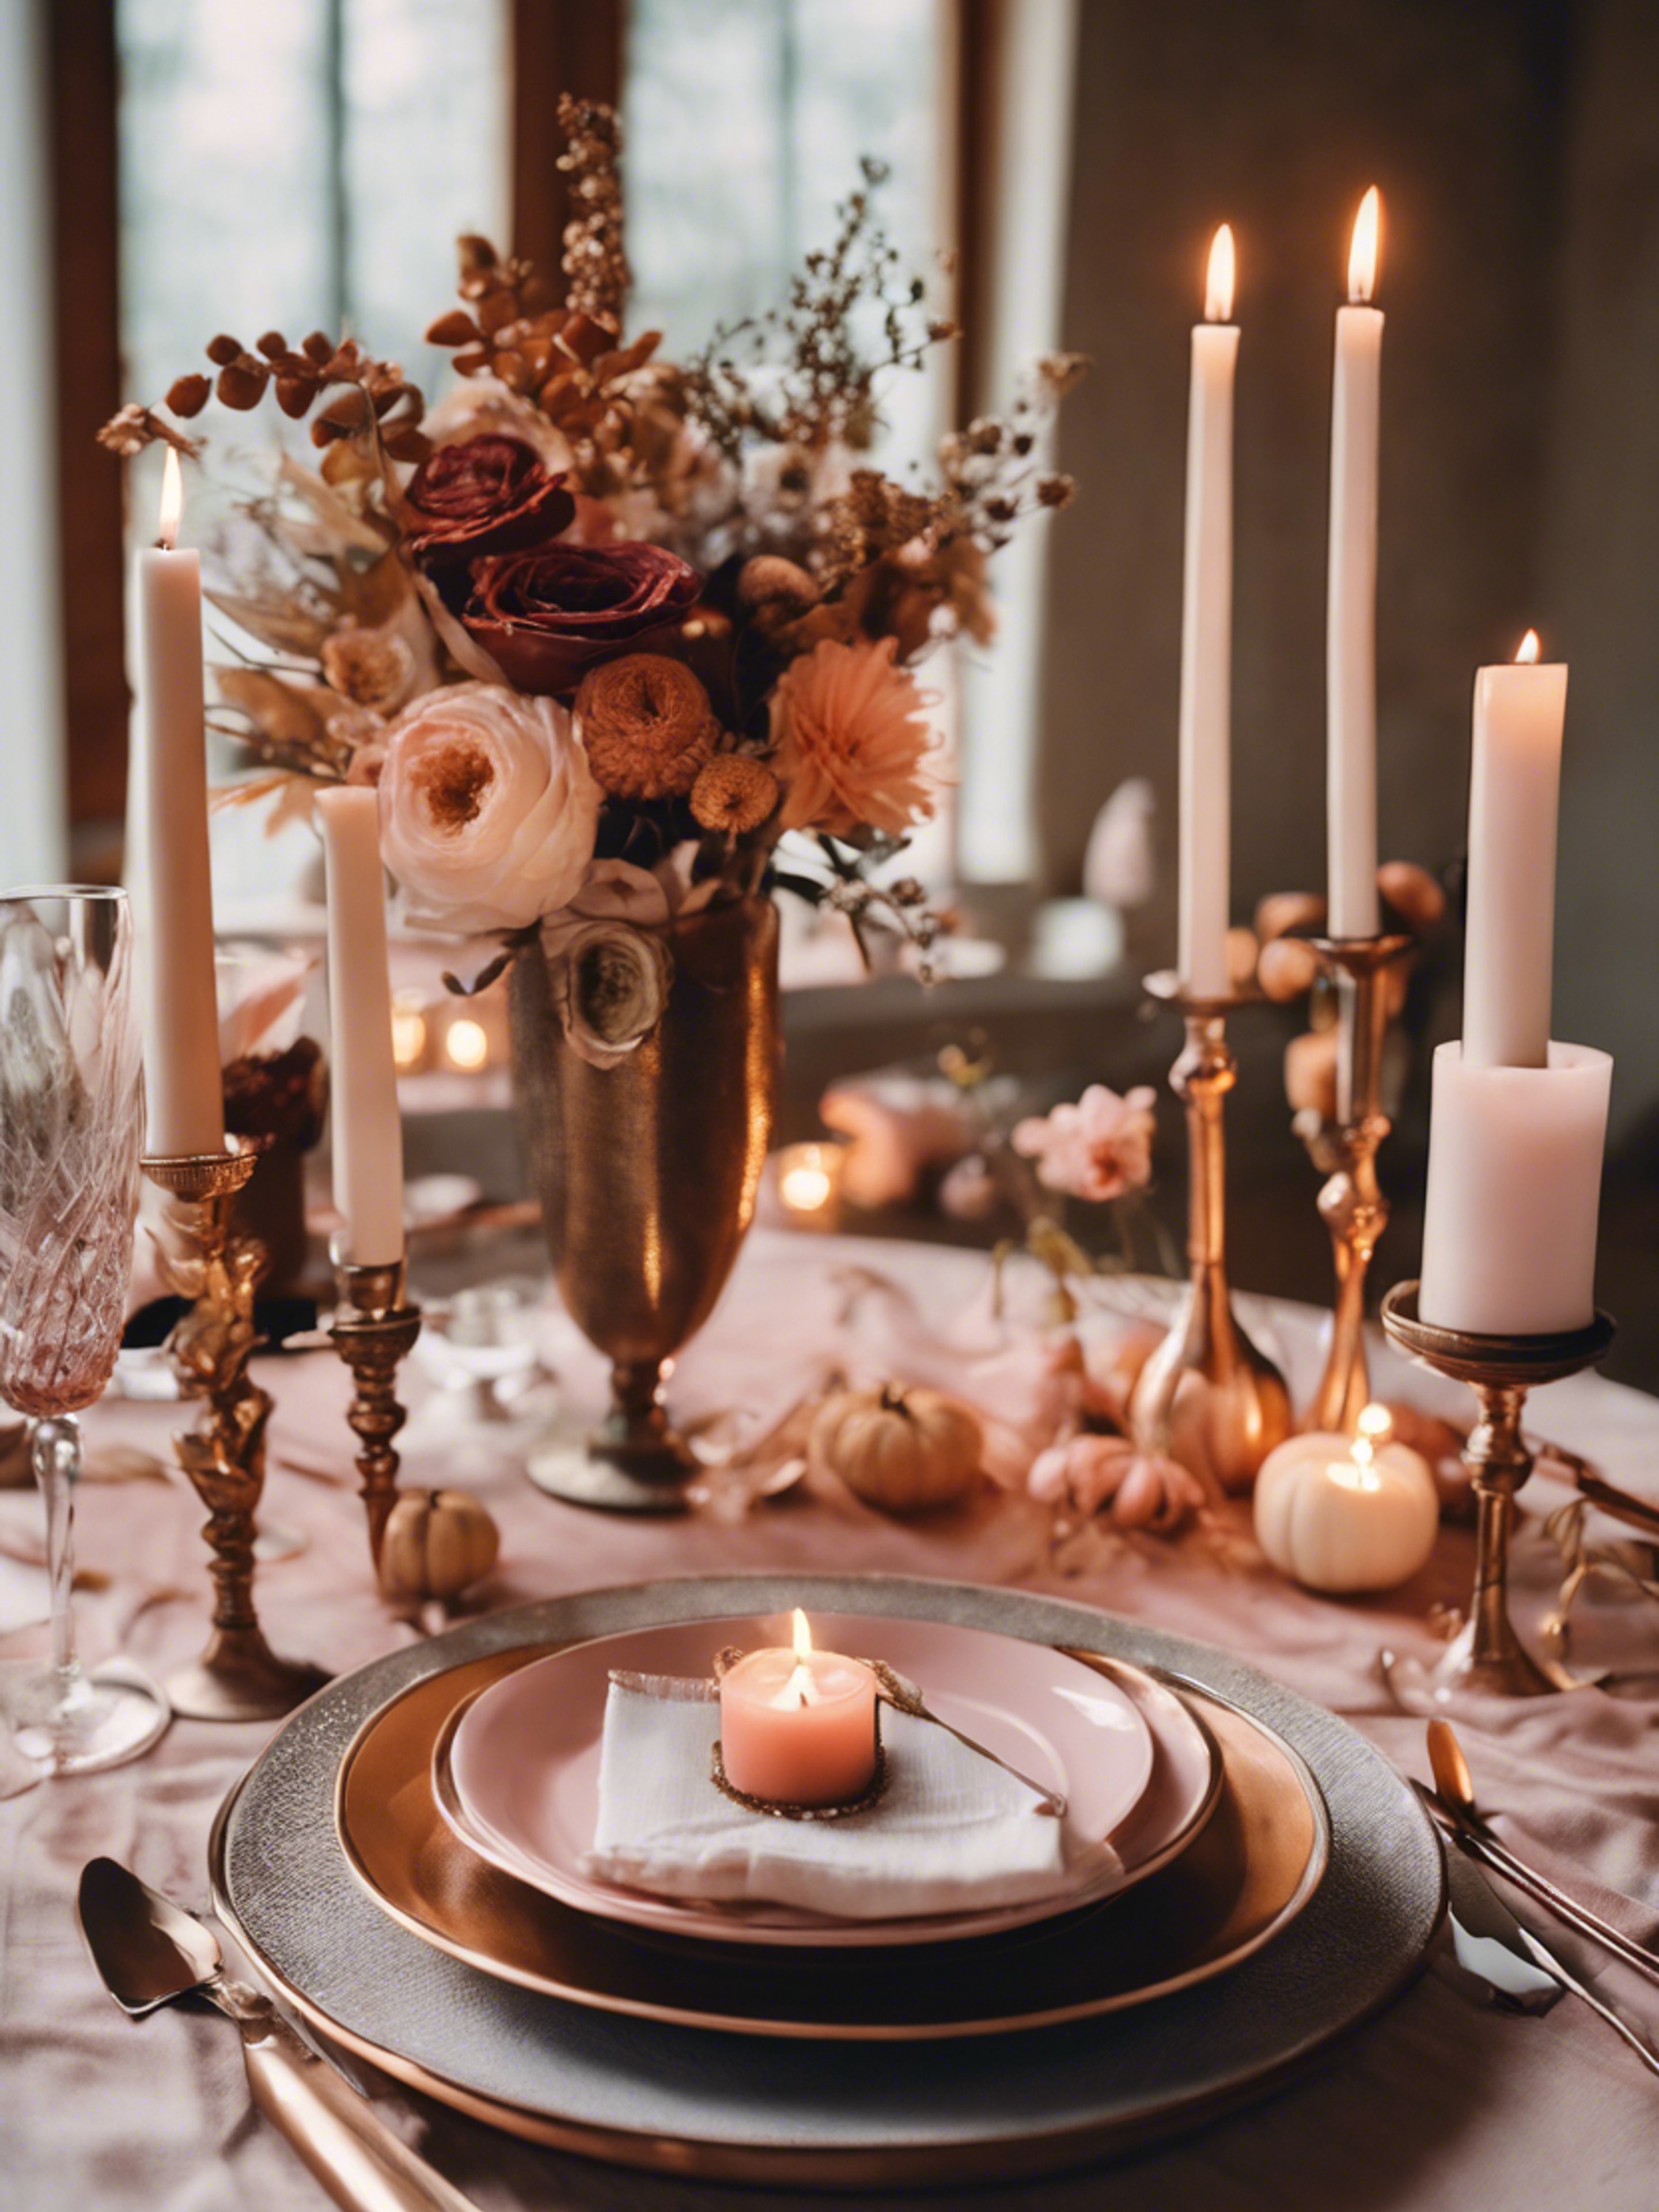 A romantic Thanksgiving tablescape for two, adorned with blush-colored candles, copper utensils, and a gorgeous floral centerpiece.壁紙[bc0a53f0db0f4071a53b]